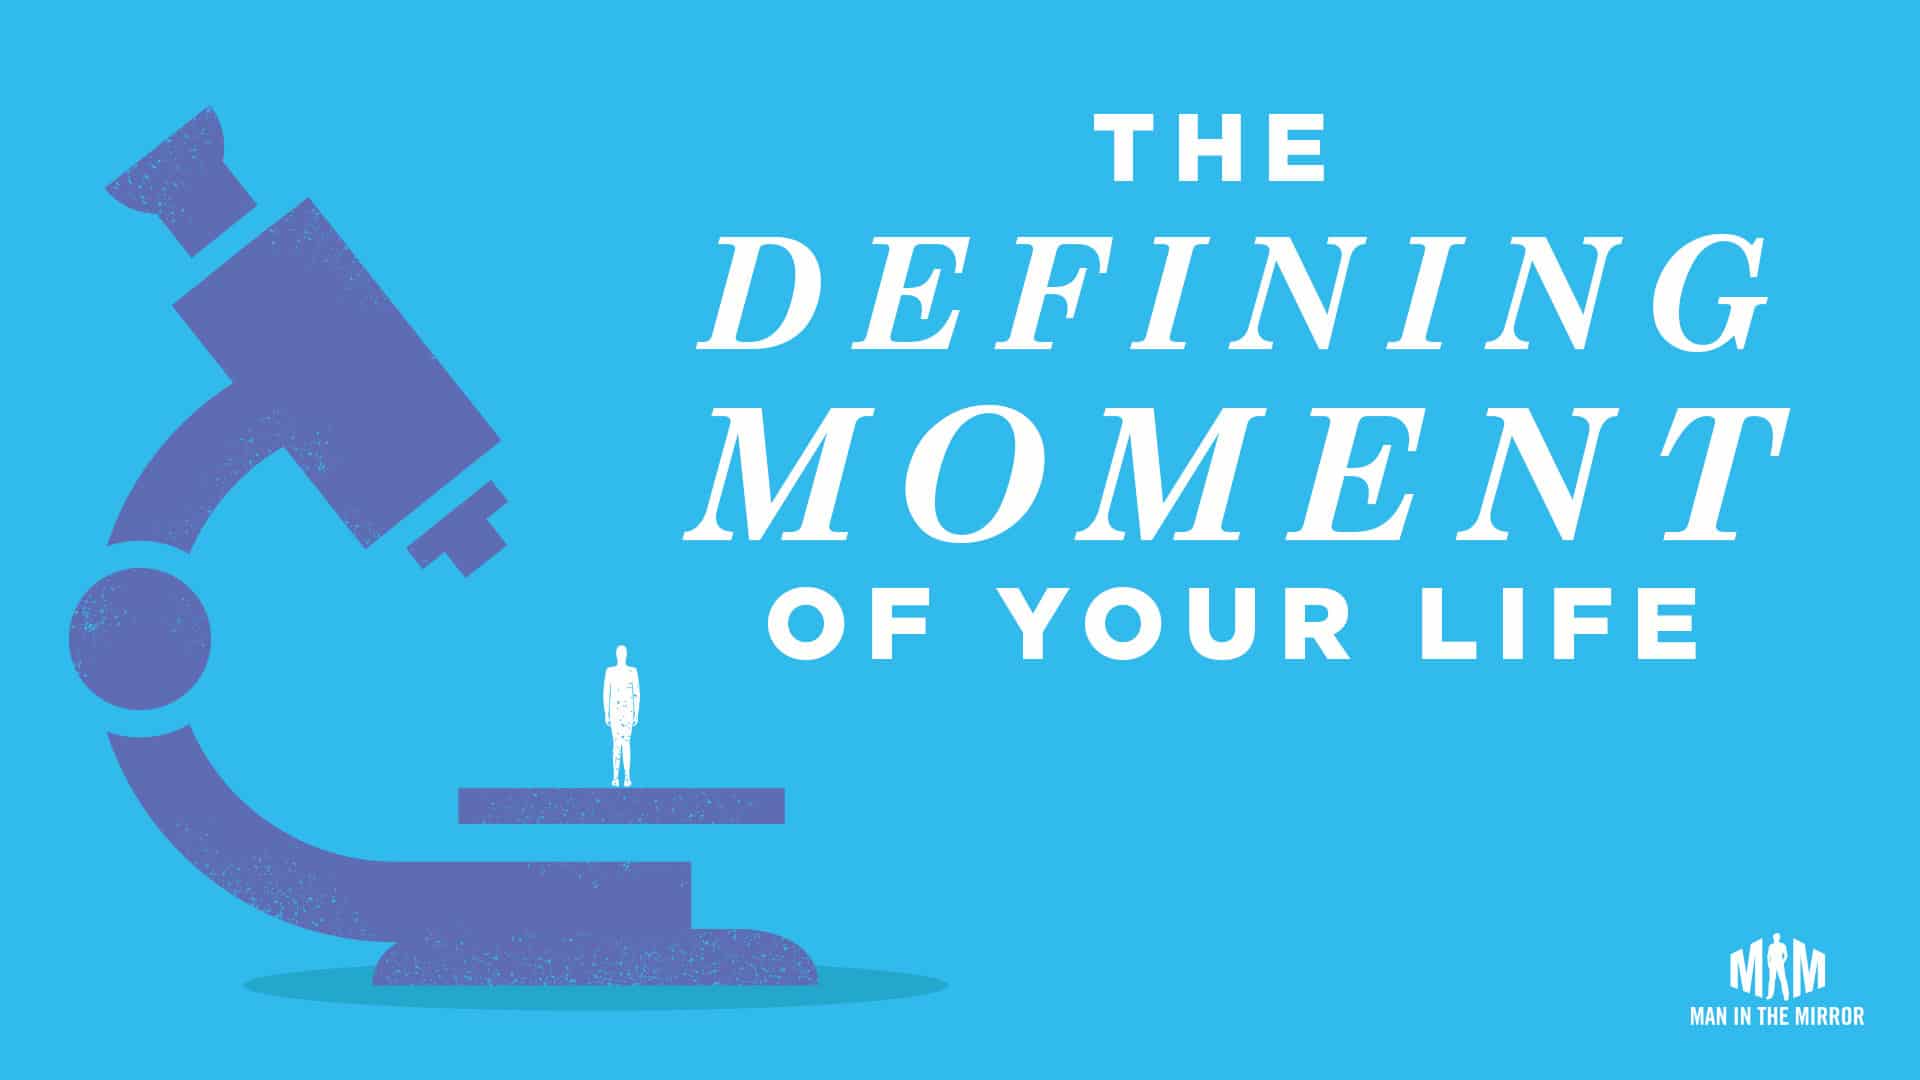 What can you learn from this moment that you could learn no other way? Patrick Morley has created this short guide to help you stop and process the bigger picture of your life through the lens of this time.